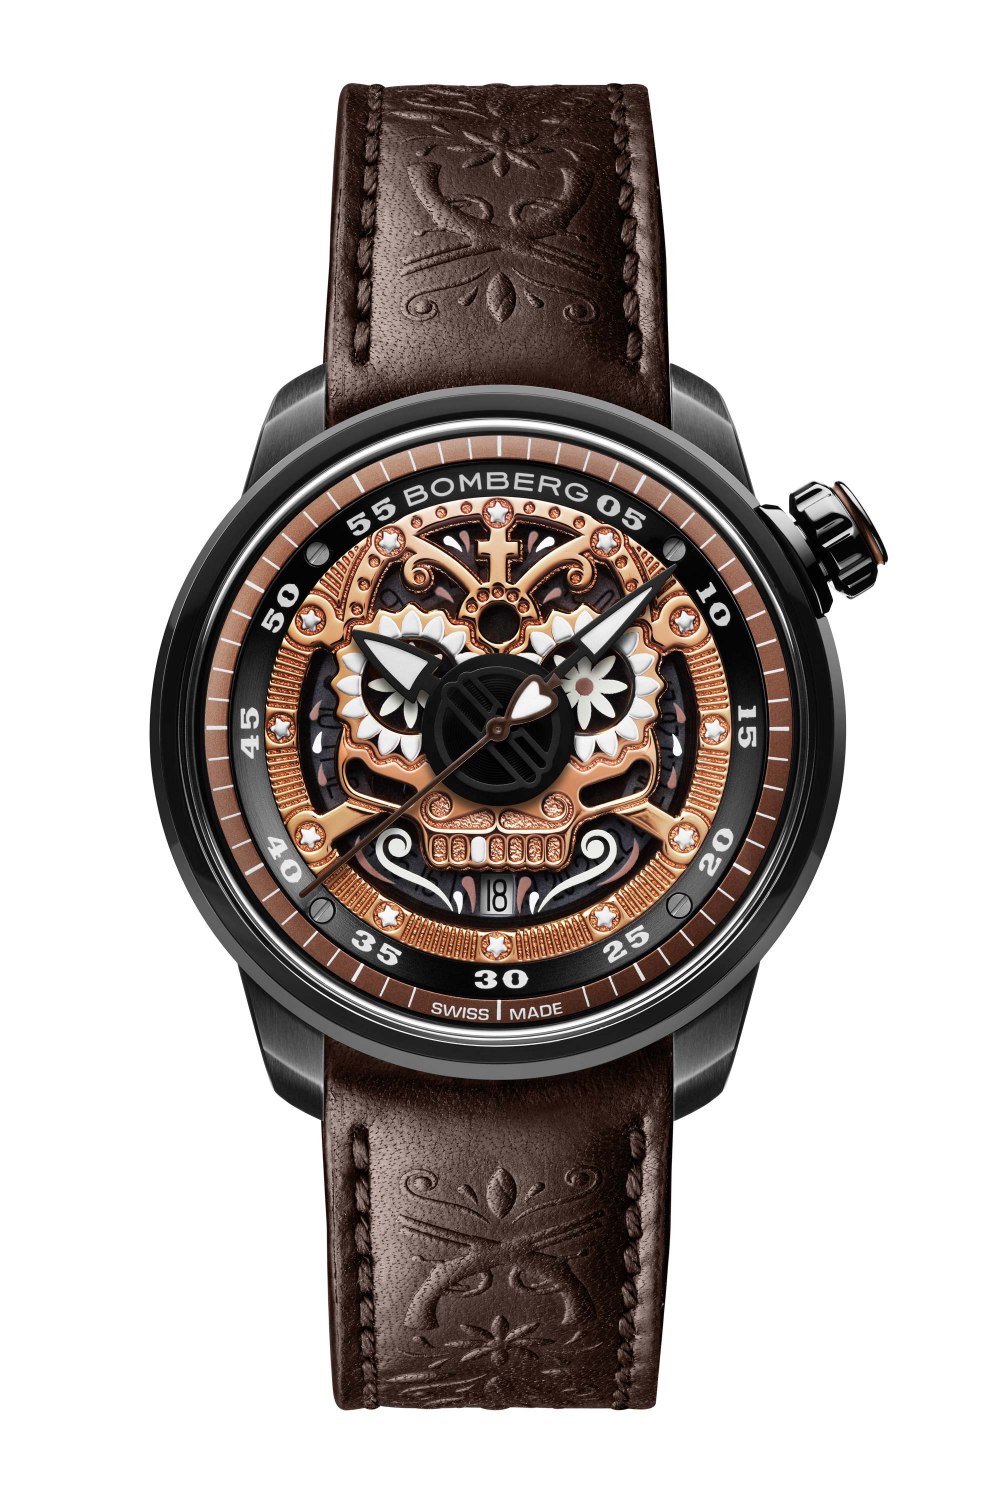 BB-01 Automatic Mariachi Skull Limited Edition